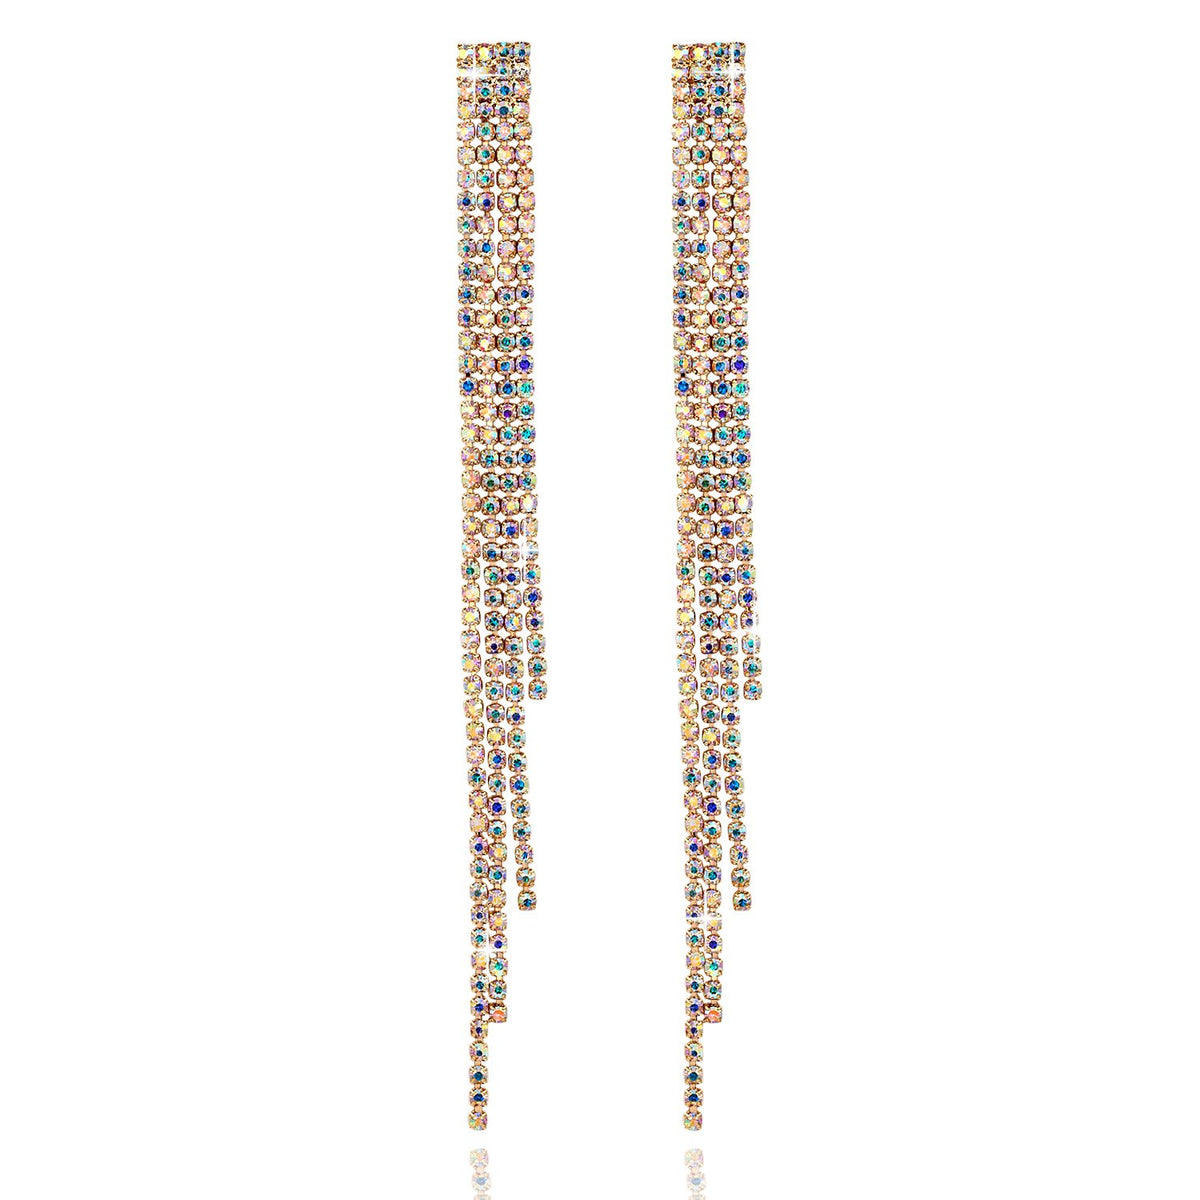 Yellow Chimes Crystals from Swarovski Glamouring Chandelier Crystal Earrings for Women and Girls